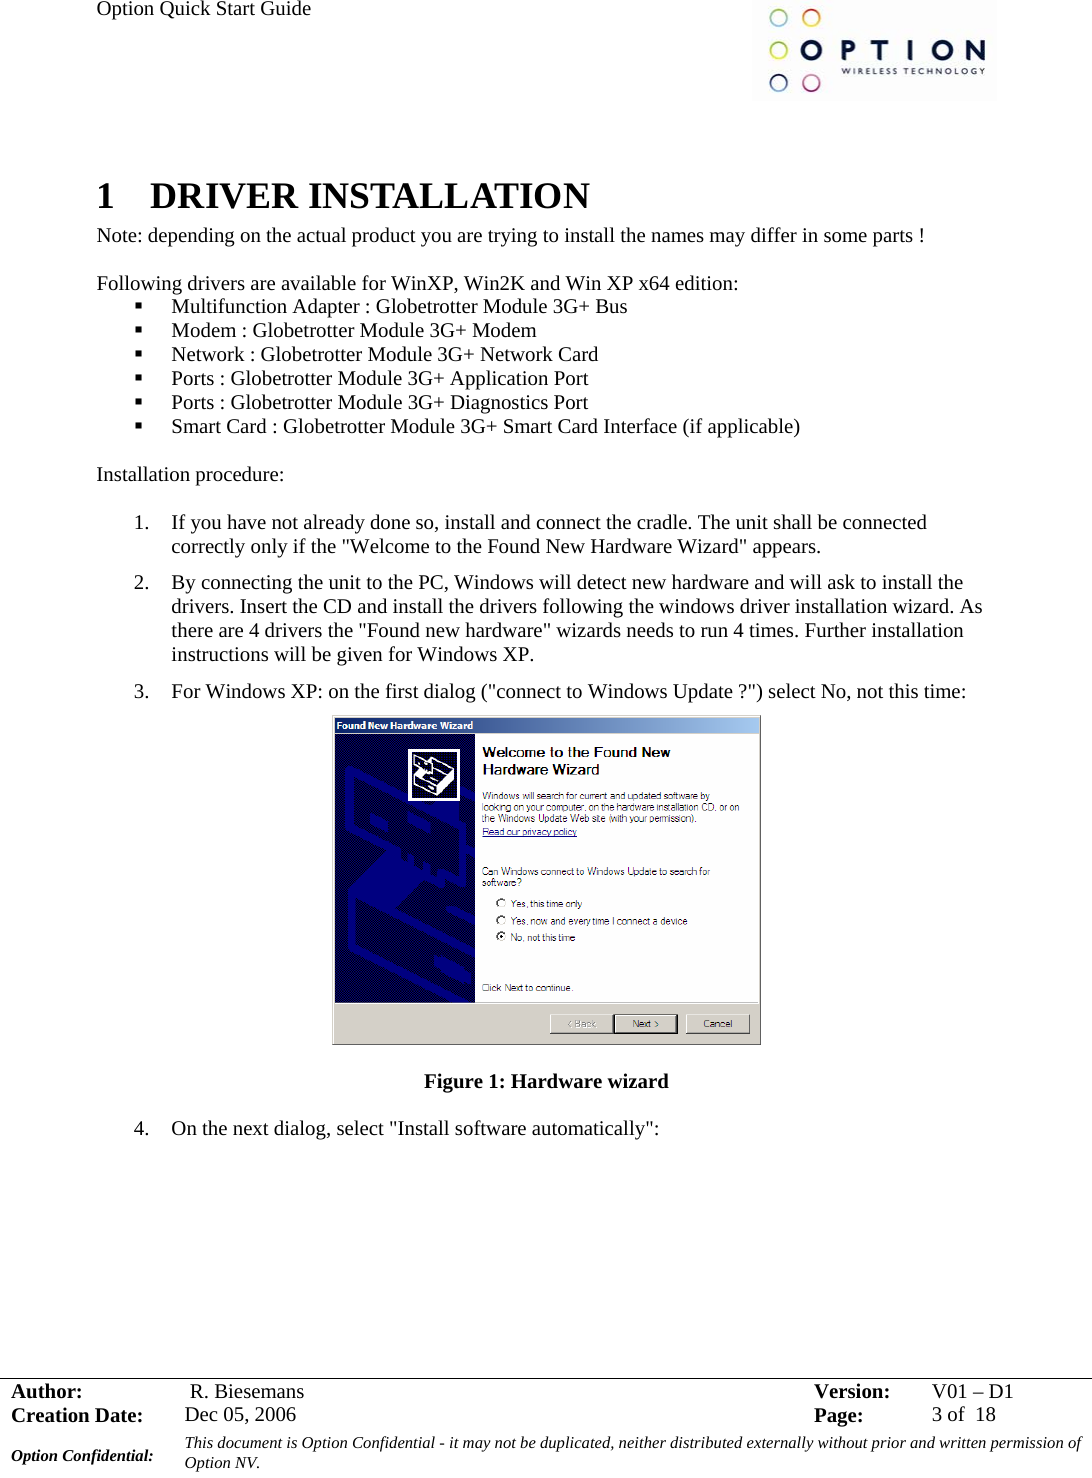 Option Quick Start Guide     Author:   R. Biesemans  Version:  V01 –D1Creation Date:  Dec 05, 2006    Page:  3 of  18 Option Confidential:  This document is Option Confidential - it may not be duplicated, neither distributed externally without prior and written permission of Option NV.    1  DRIVER INSTALLATION Note: depending on the actual product you are trying to install the names may differ in some parts !  Following drivers are available for WinXP, Win2K and Win XP x64 edition:  Multifunction Adapter : Globetrotter Module 3G+ Bus  Modem : Globetrotter Module 3G+ Modem  Network : Globetrotter Module 3G+ Network Card  Ports : Globetrotter Module 3G+ Application Port  Ports : Globetrotter Module 3G+ Diagnostics Port  Smart Card : Globetrotter Module 3G+ Smart Card Interface (if applicable)   Installation procedure:  1. If you have not already done so, install and connect the cradle. The unit shall be connected correctly only if the &quot;Welcome to the Found New Hardware Wizard&quot; appears. 2. By connecting the unit to the PC, Windows will detect new hardware and will ask to install the drivers. Insert the CD and install the drivers following the windows driver installation wizard. As there are 4 drivers the &quot;Found new hardware&quot; wizards needs to run 4 times. Further installation instructions will be given for Windows XP. 3. For Windows XP: on the first dialog (&quot;connect to Windows Update ?&quot;) select No, not this time:  Figure 1: Hardware wizard  4. On the next dialog, select &quot;Install software automatically&quot;: 